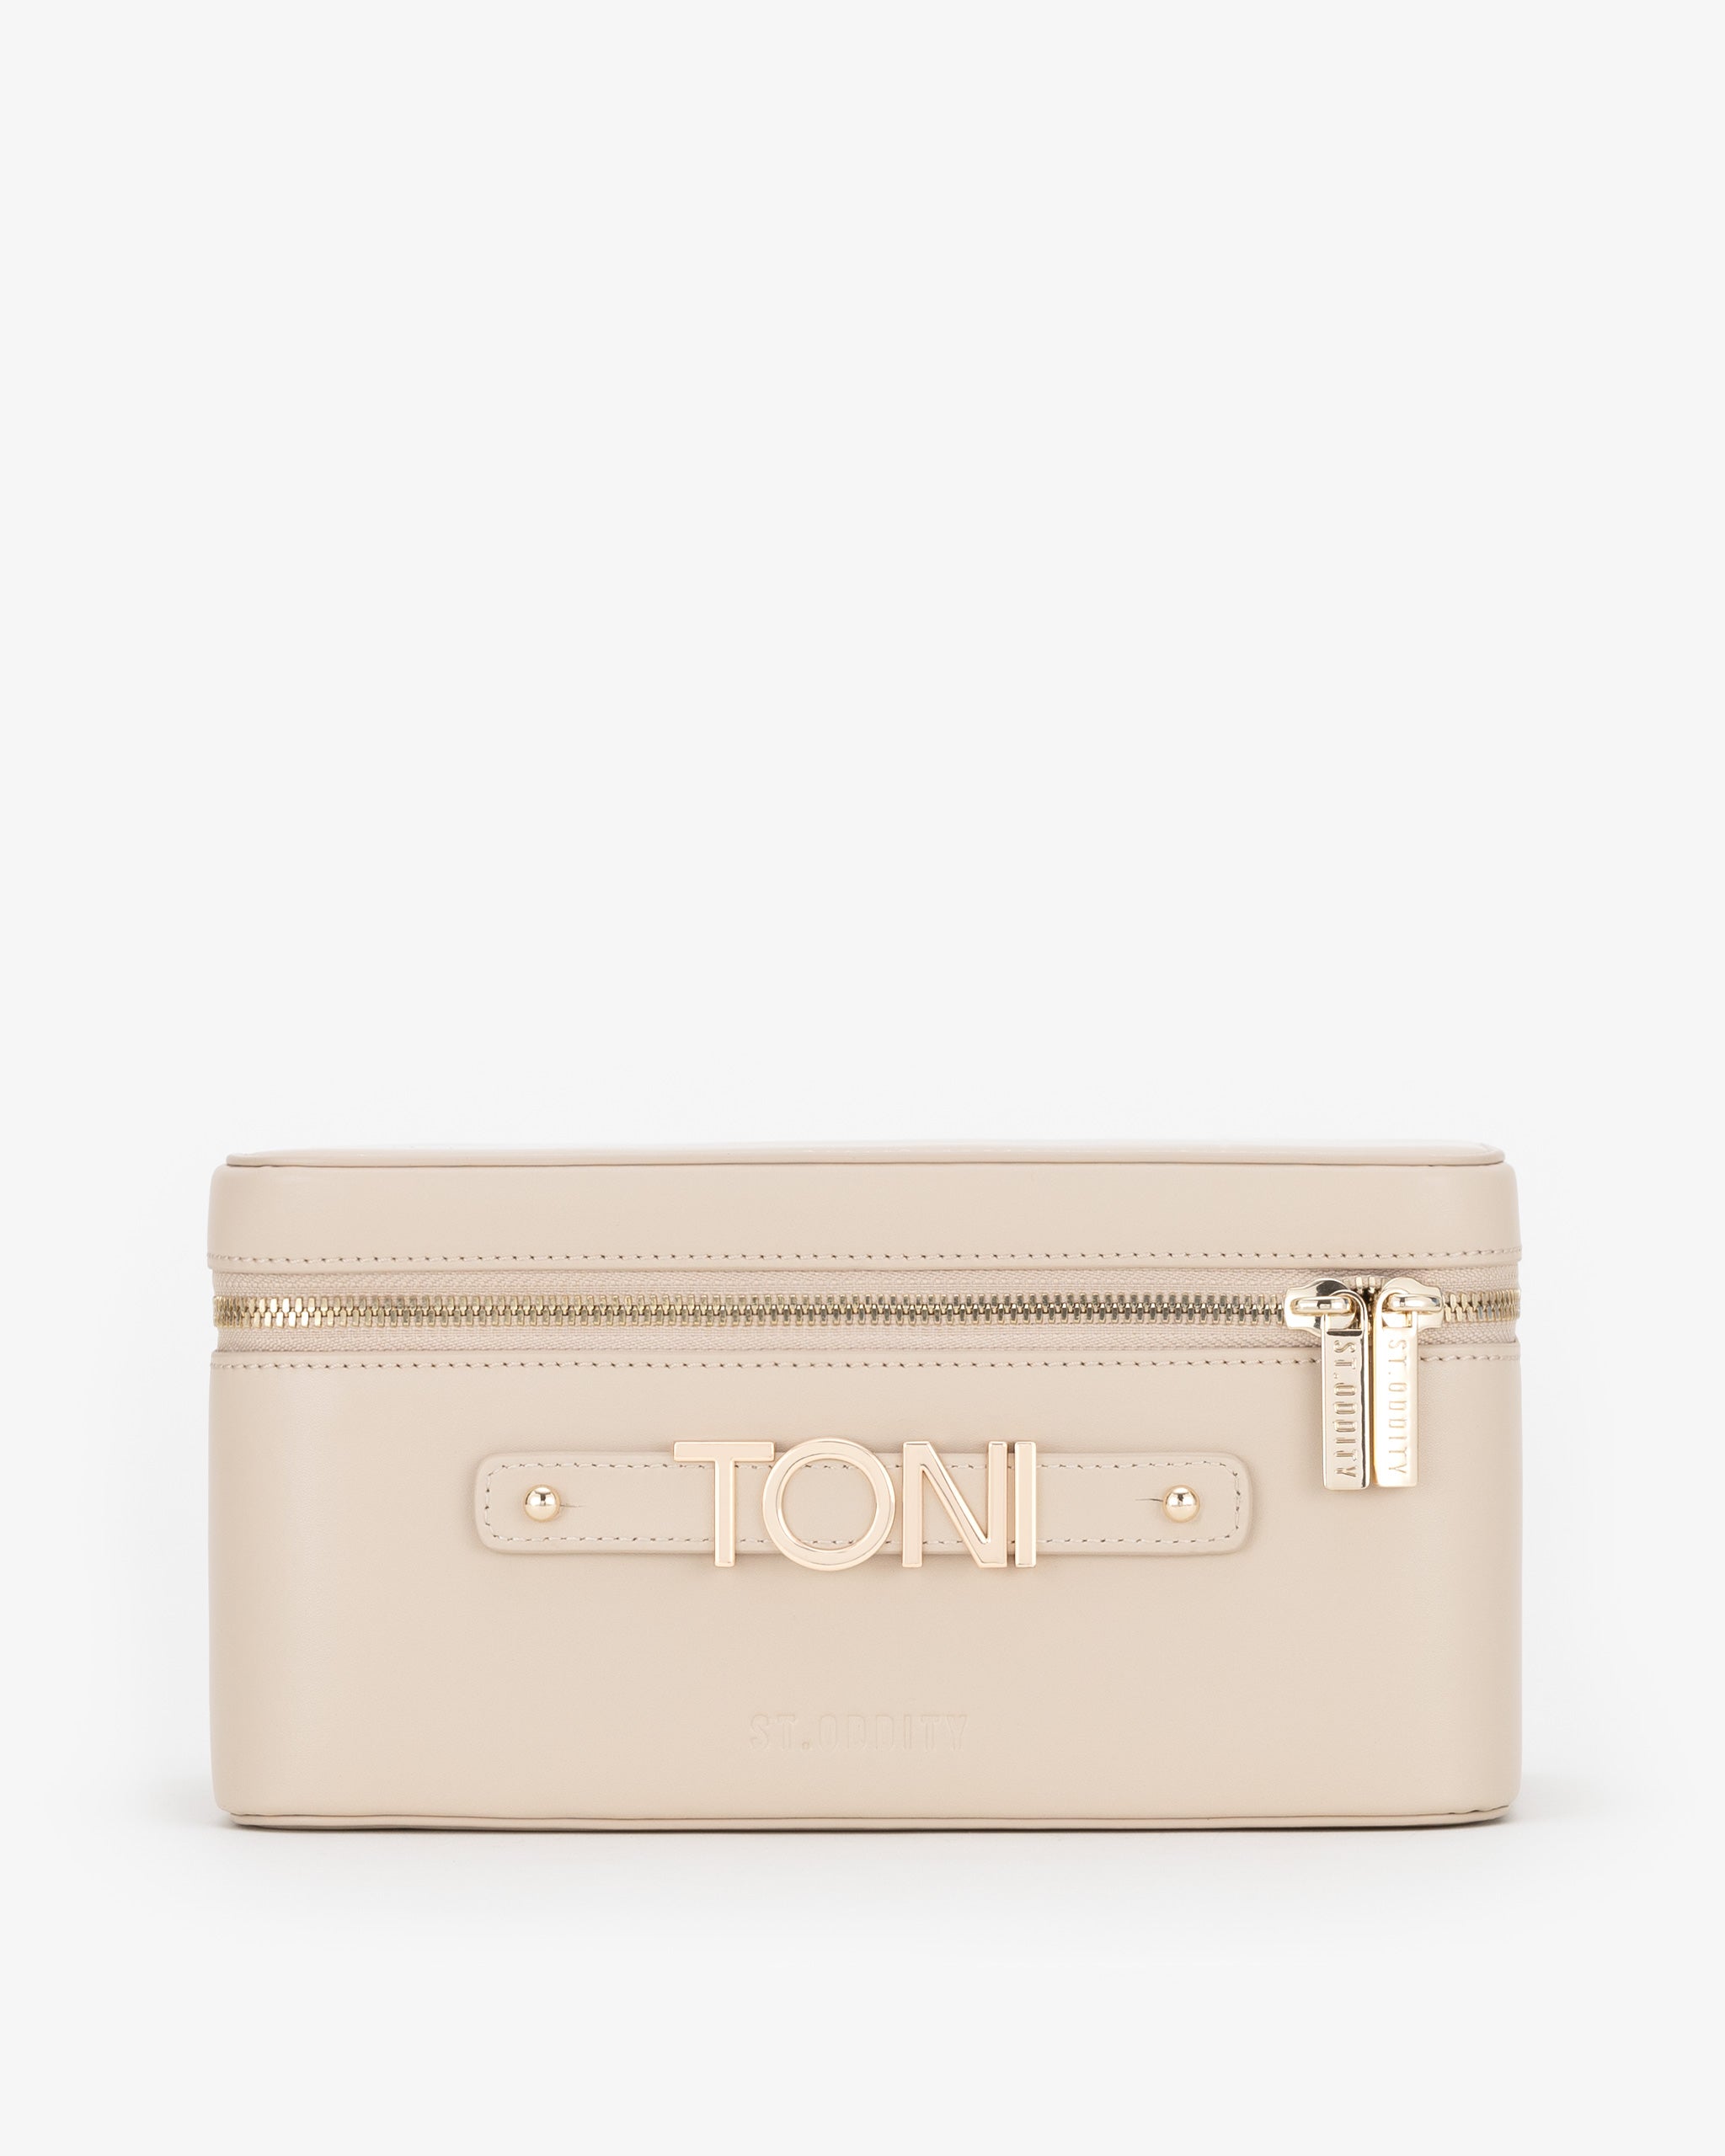 Pre-order (Mid-May): Vanity Case in Light Sand with Personalised Hardware